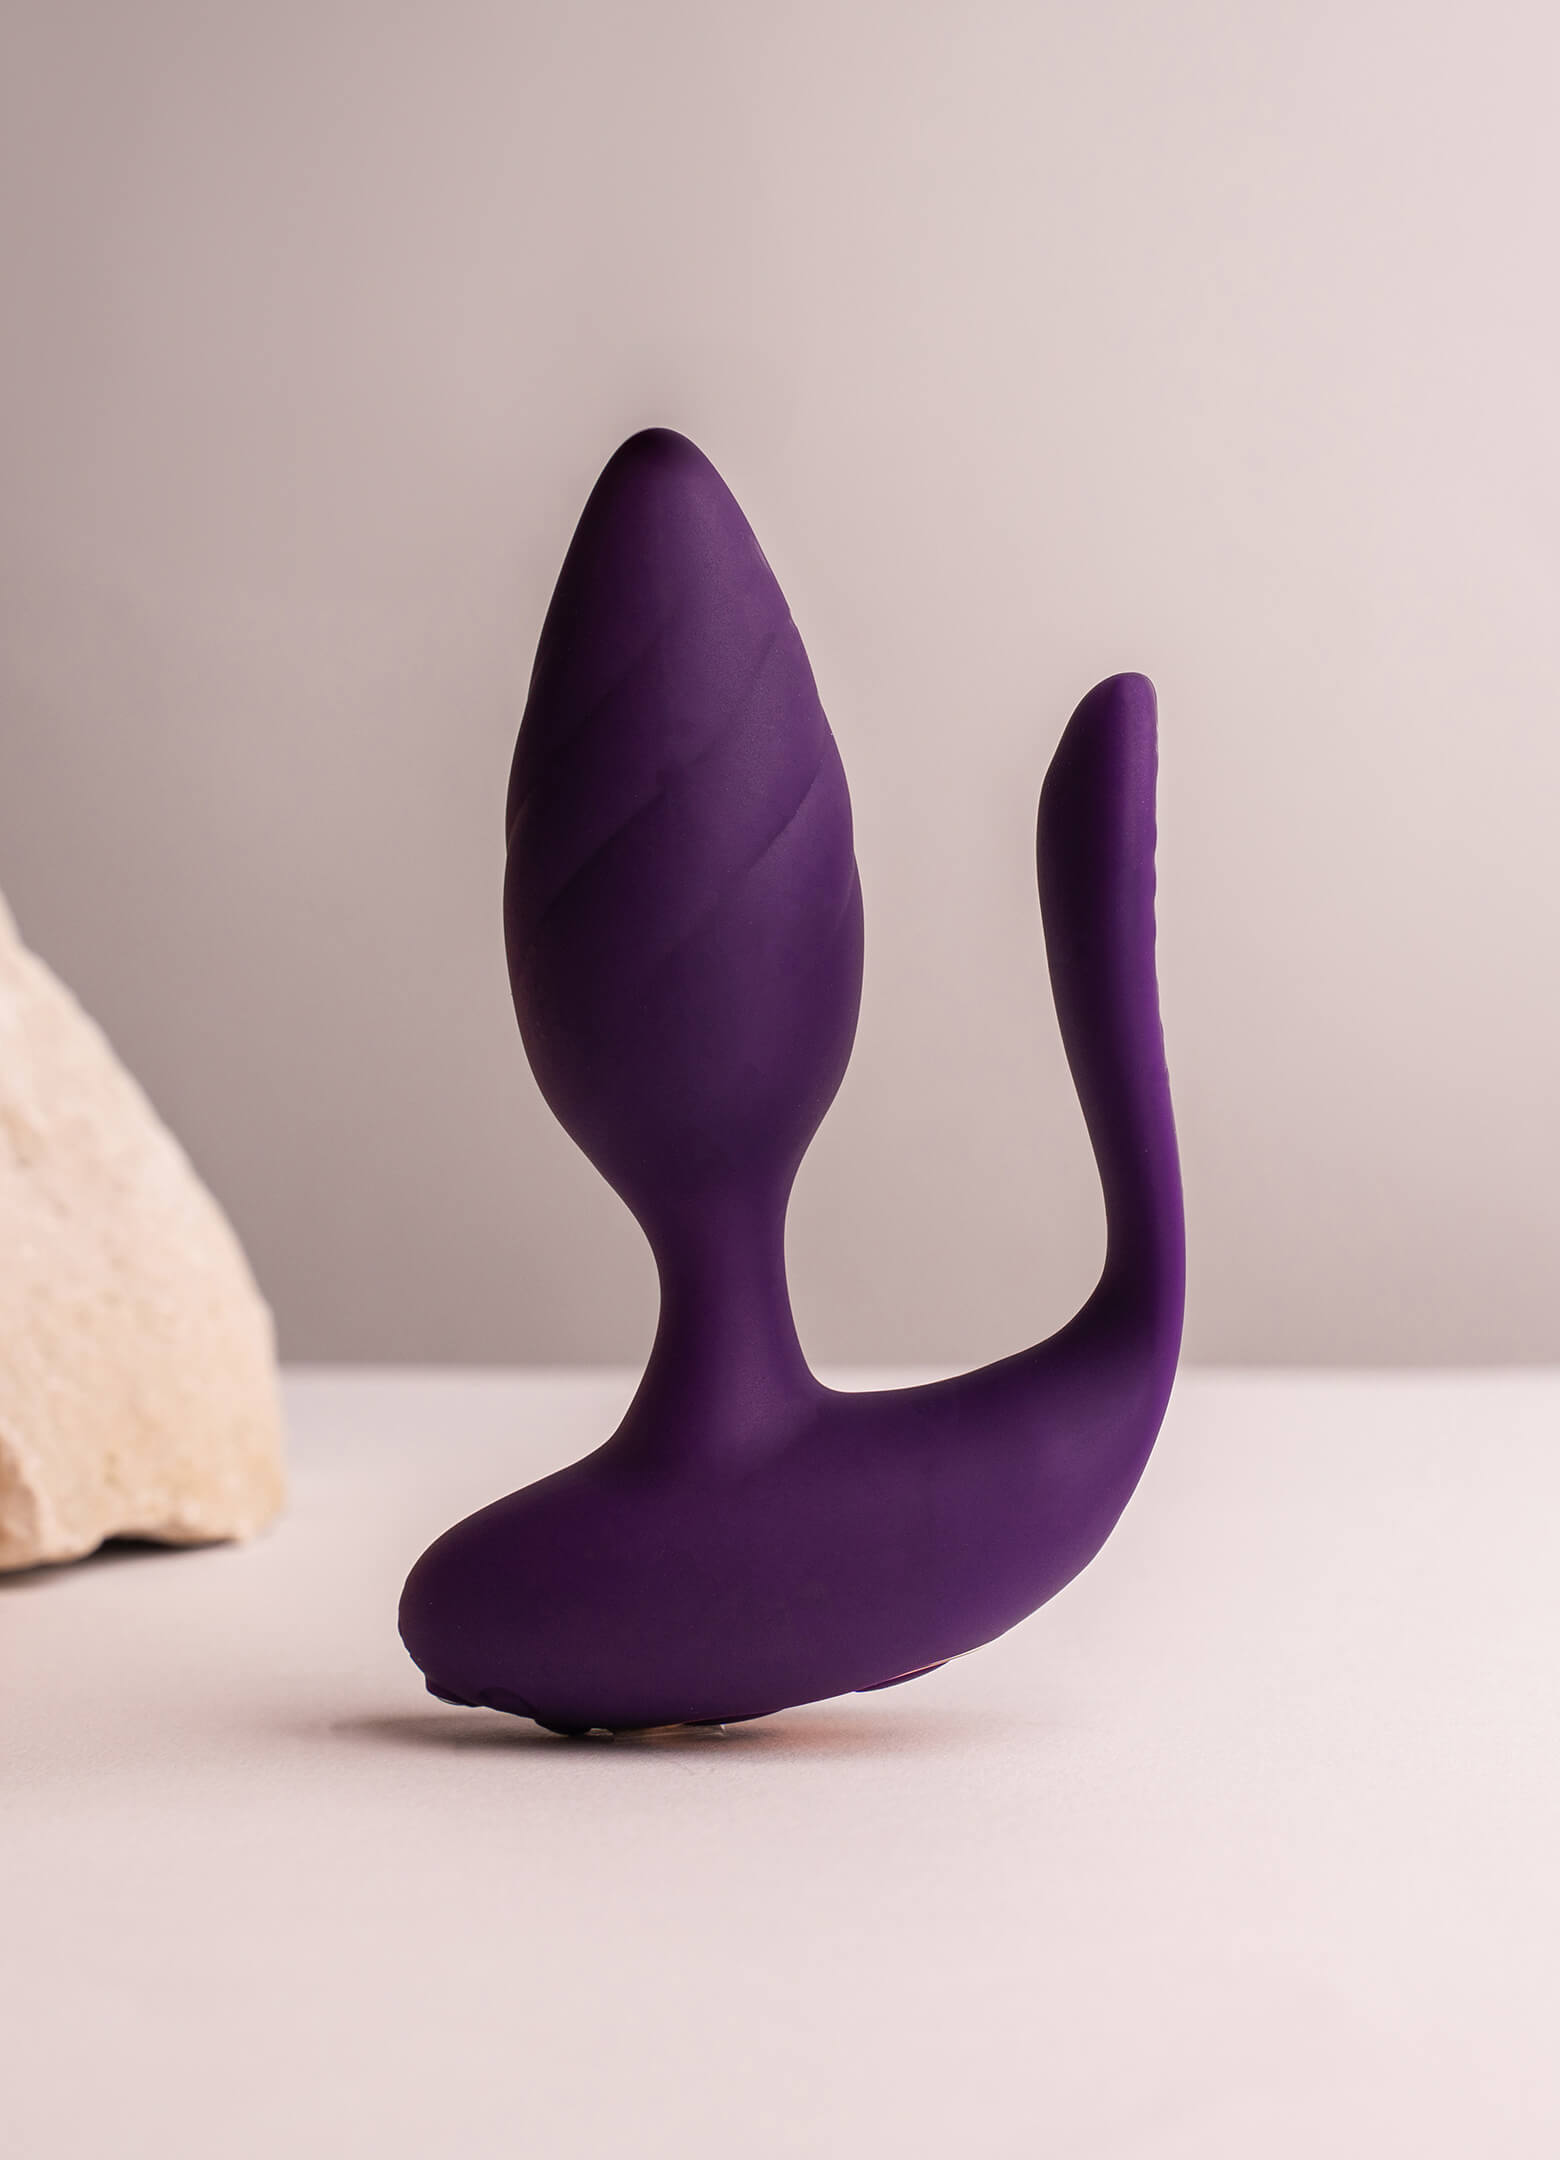 Purple silicone butt plug with an insertable vaginal tail.